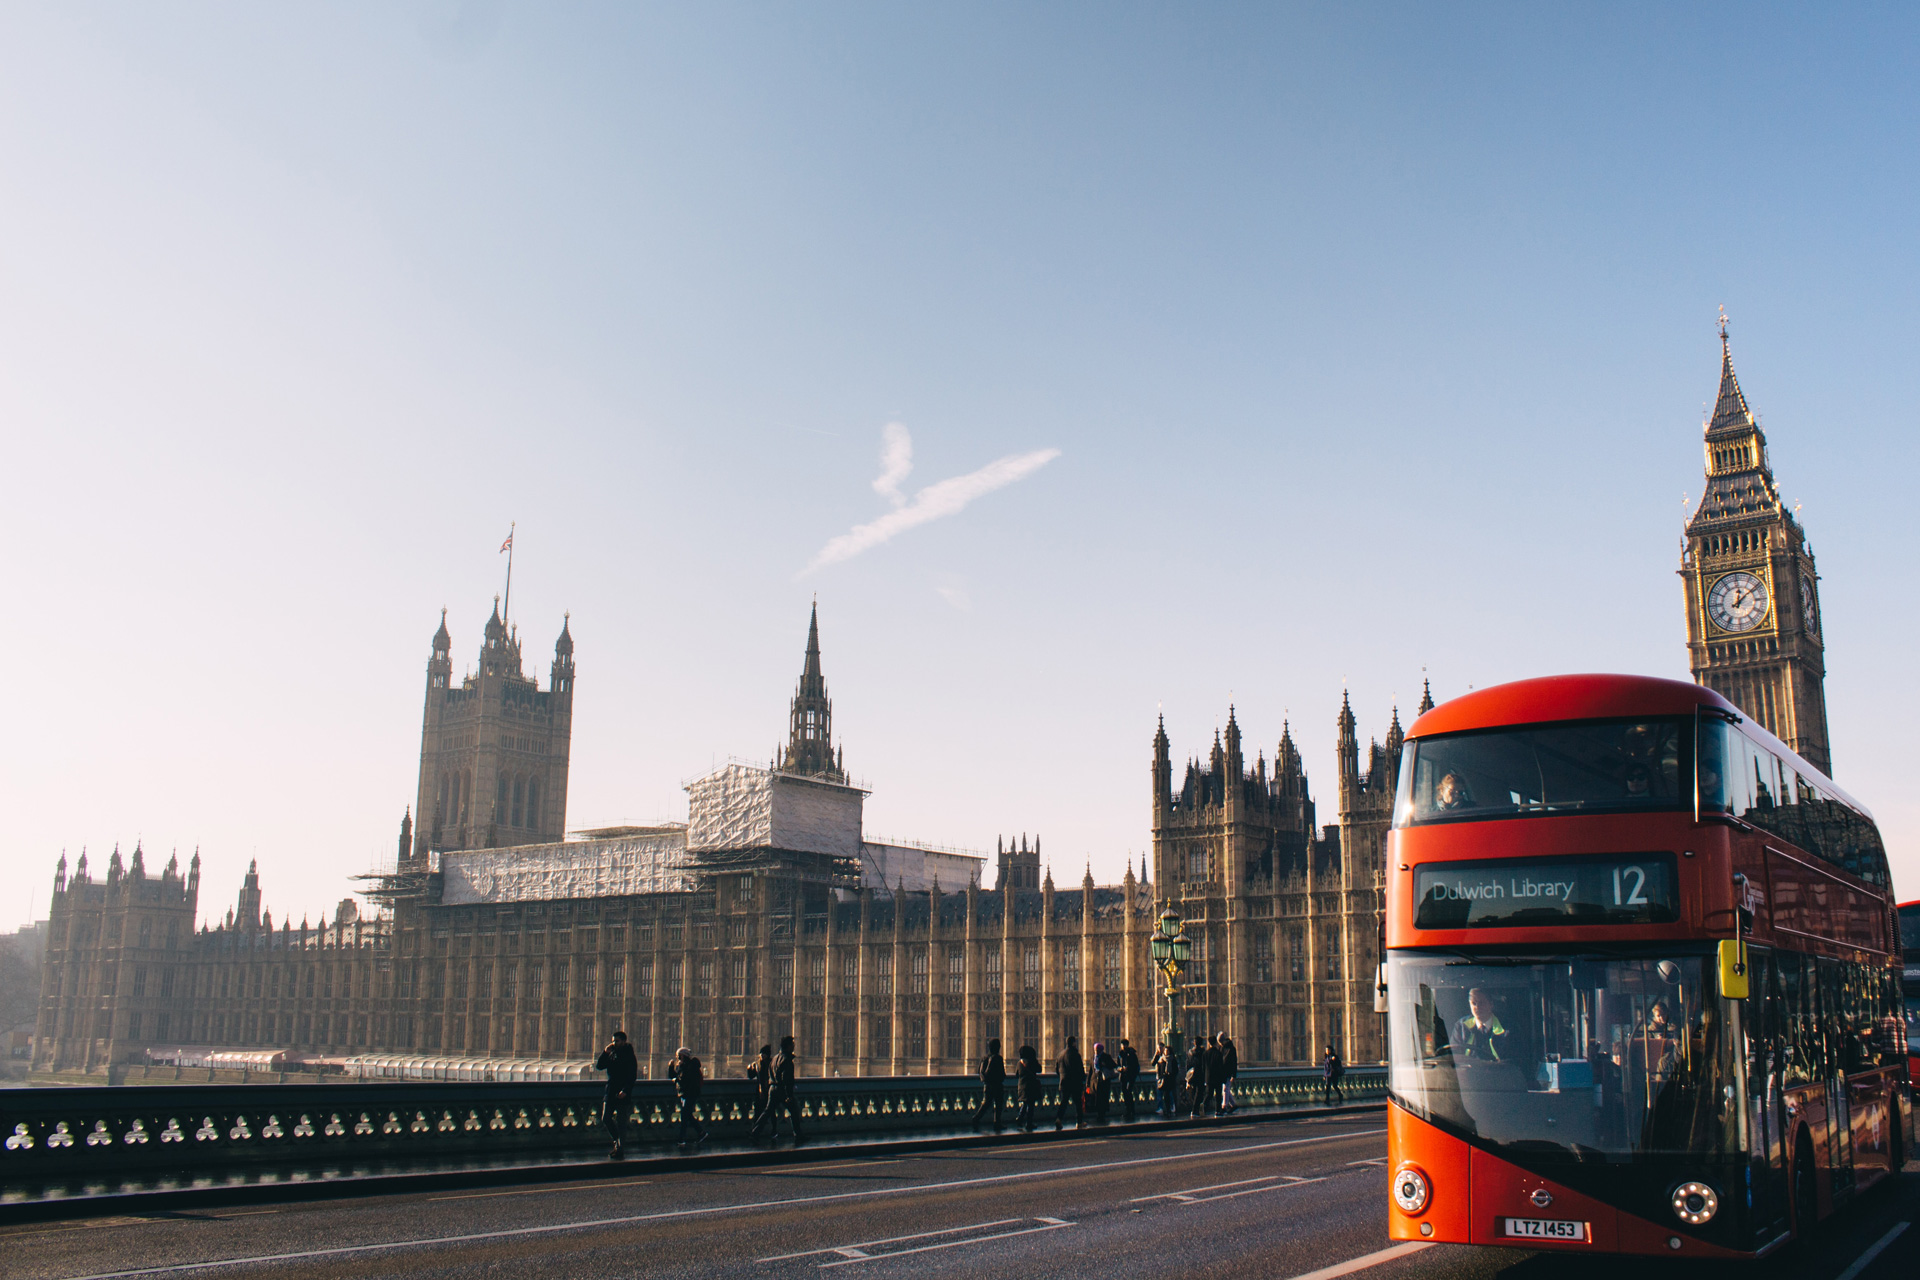 A bus and Big Ben in London